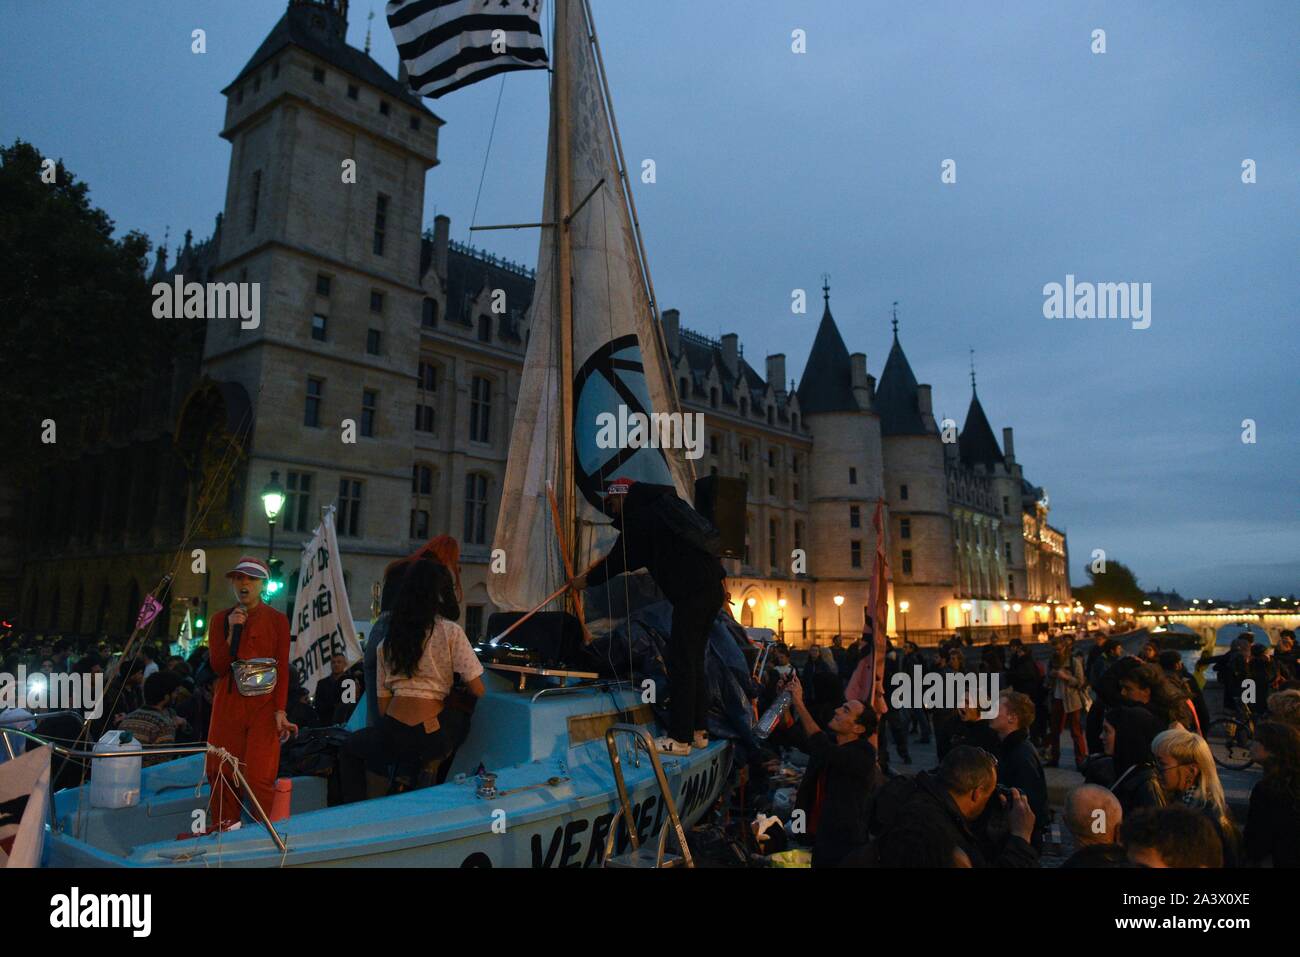 *** STRICTLY NO SALES TO FRENCH MEDIA OR PUBLISHERS *** October 07, 2019 - Paris, France: Activists from  Extinction Rebellion set up a small camp where they prepare to spend the night to enforce a blockade of Place du Chatelet in central Paris as part of their global environment protest movement. Stock Photo